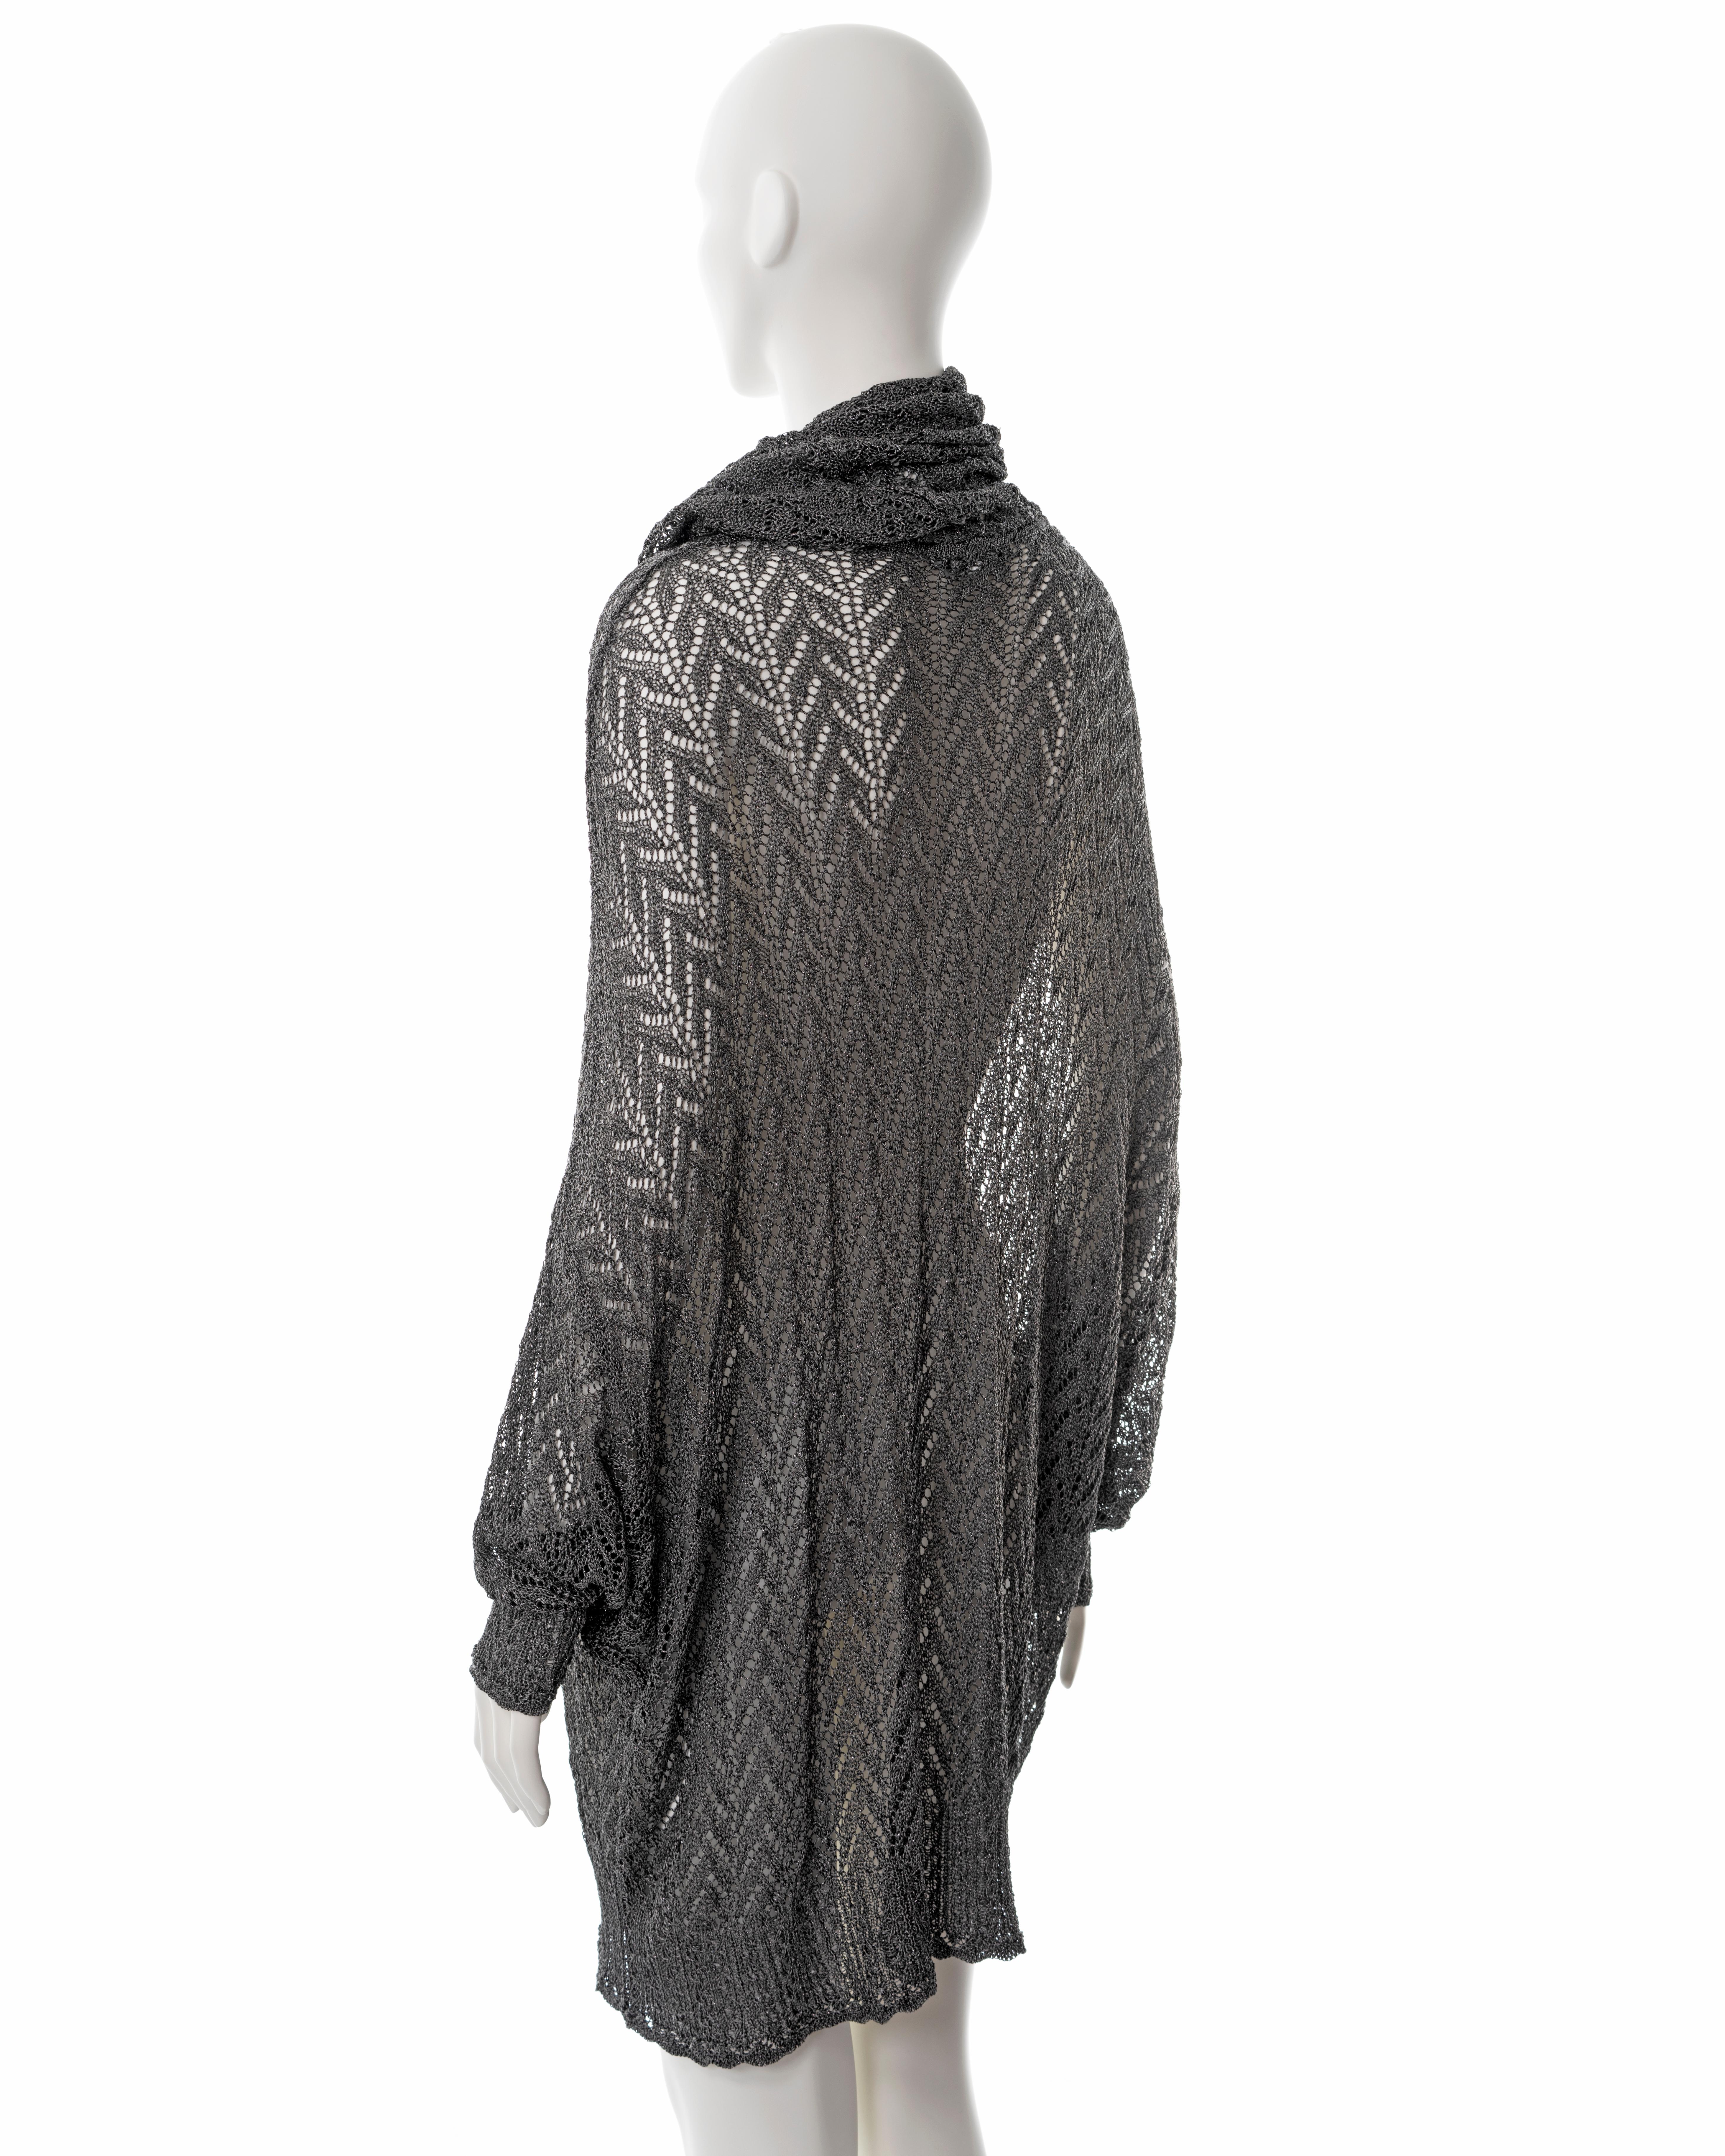 Christian Dior by John Galliano silver crochet sweater dress, fw 1998 For Sale 4